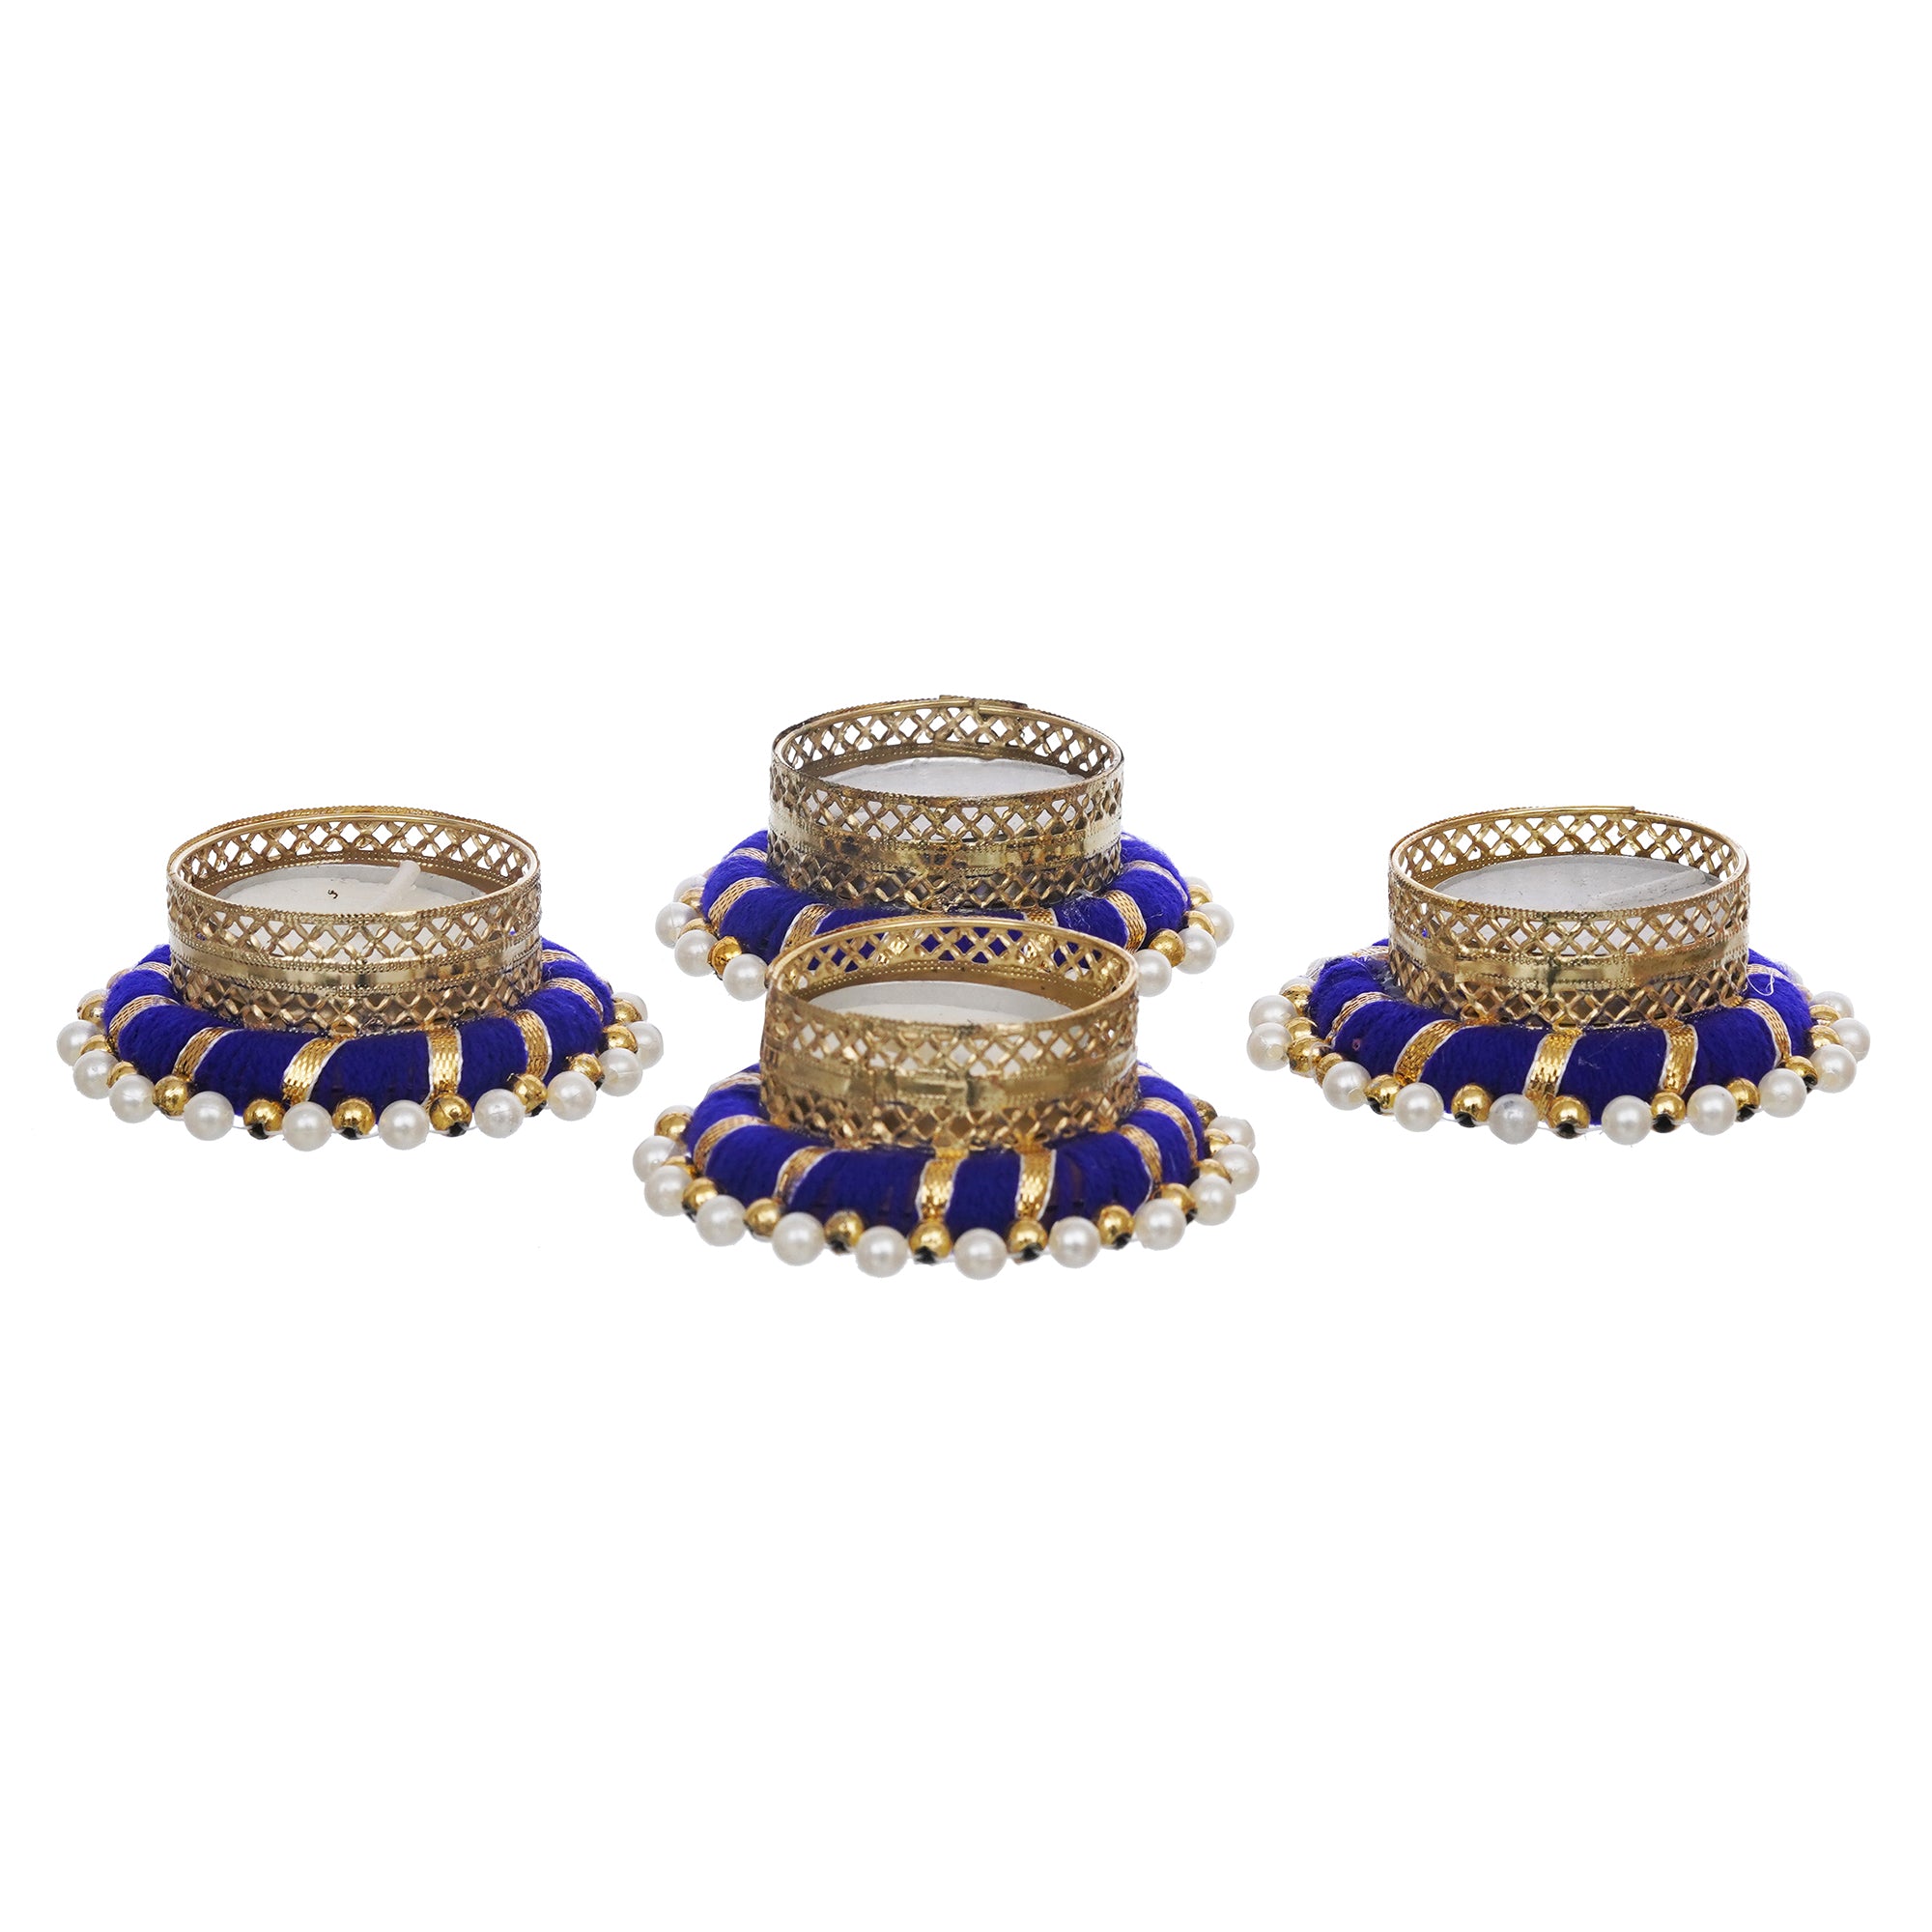 eCraftIndia Set of 4 Golden and Blue Round Shaped Beaded Decorative Tea Light Candle Holders 6